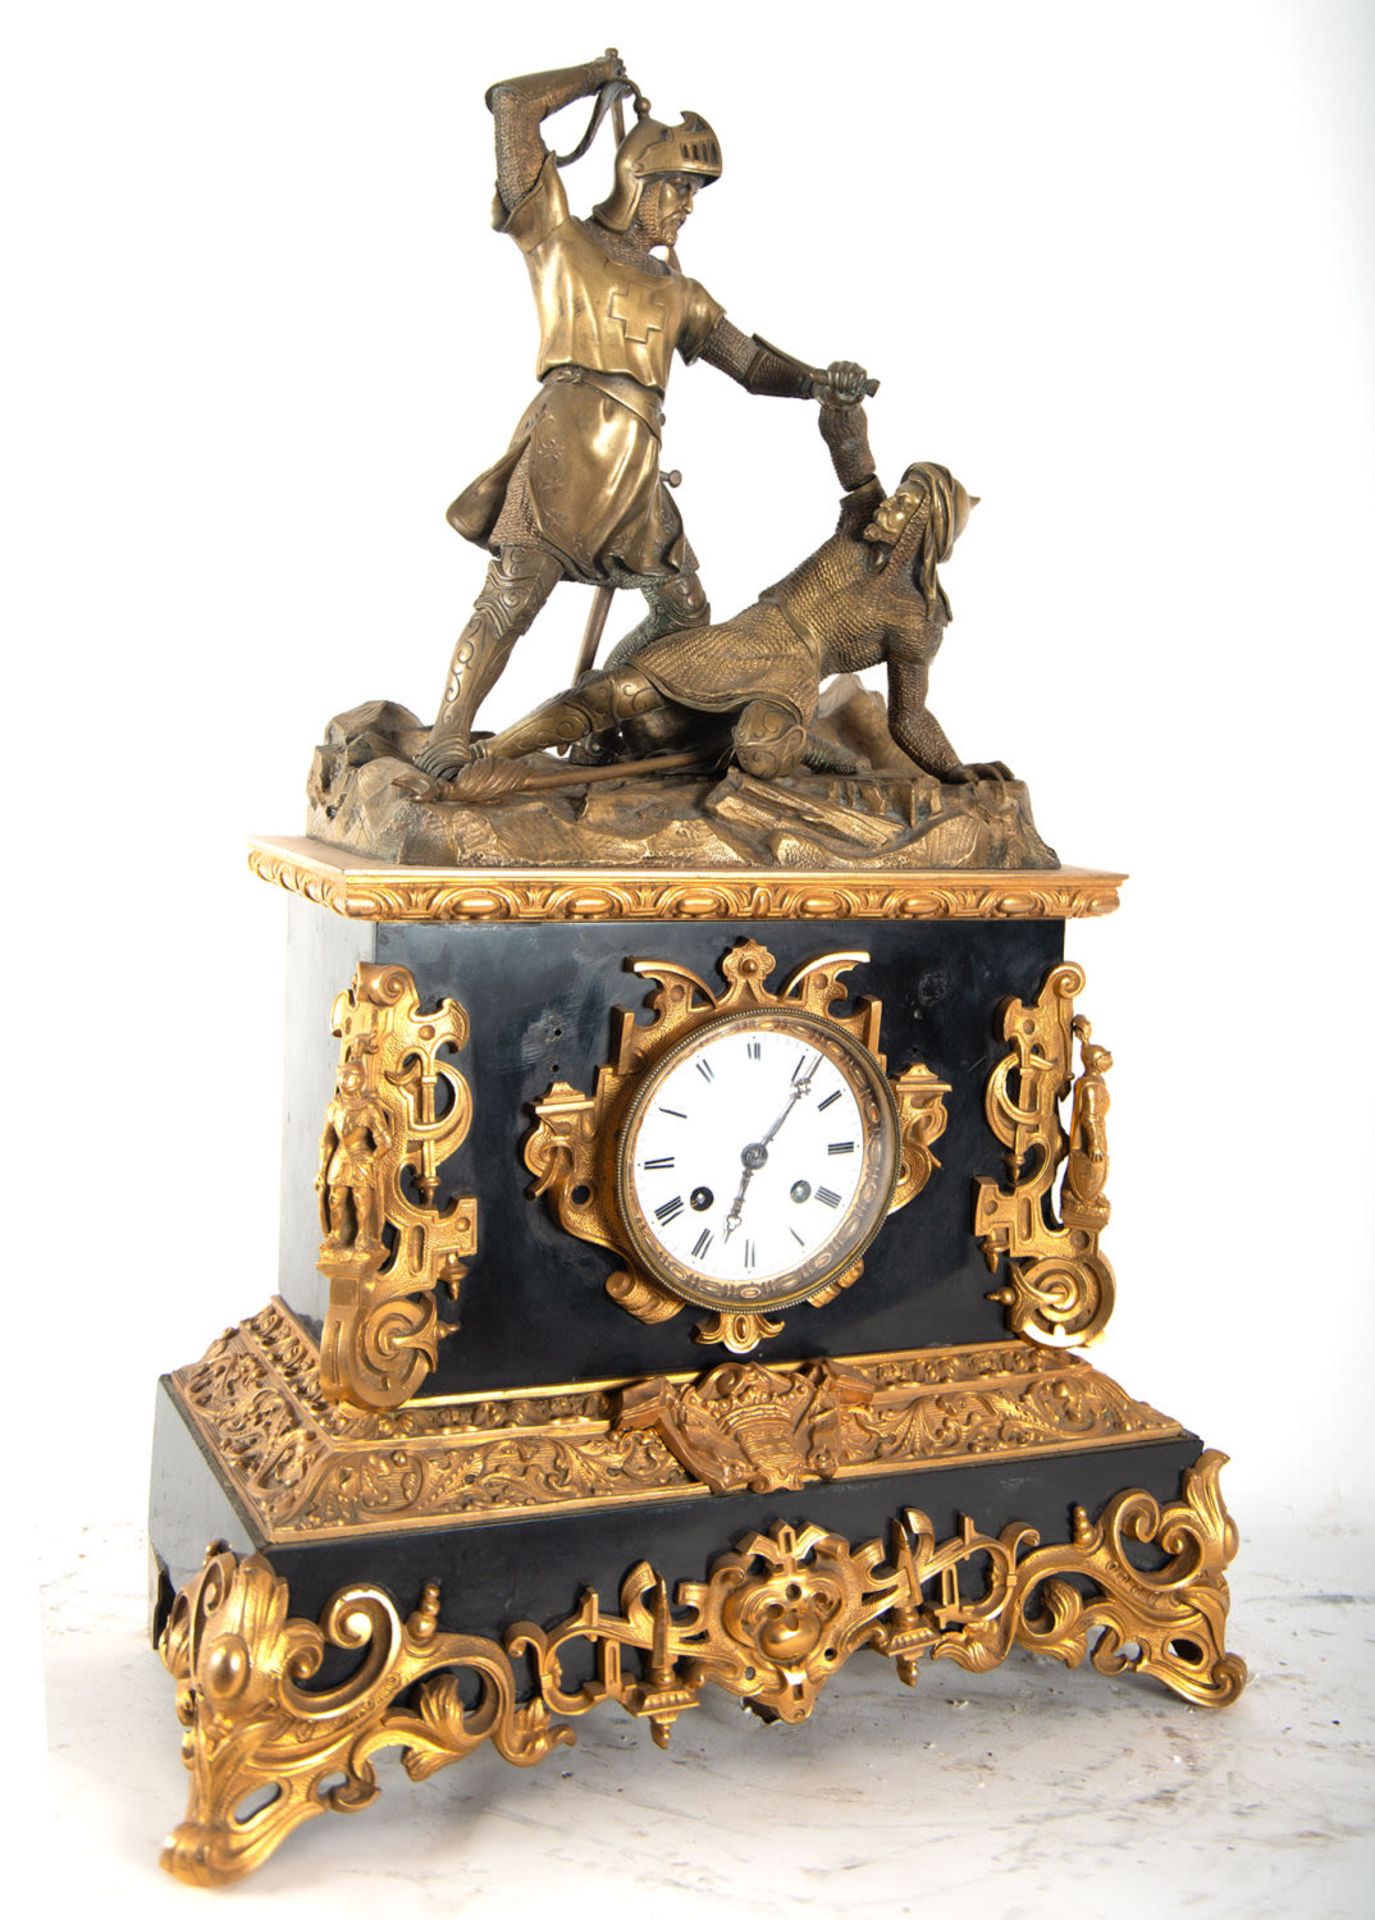 Gilt bronze clock depicting a Templar knight in the crusades, 19th century - Image 2 of 7